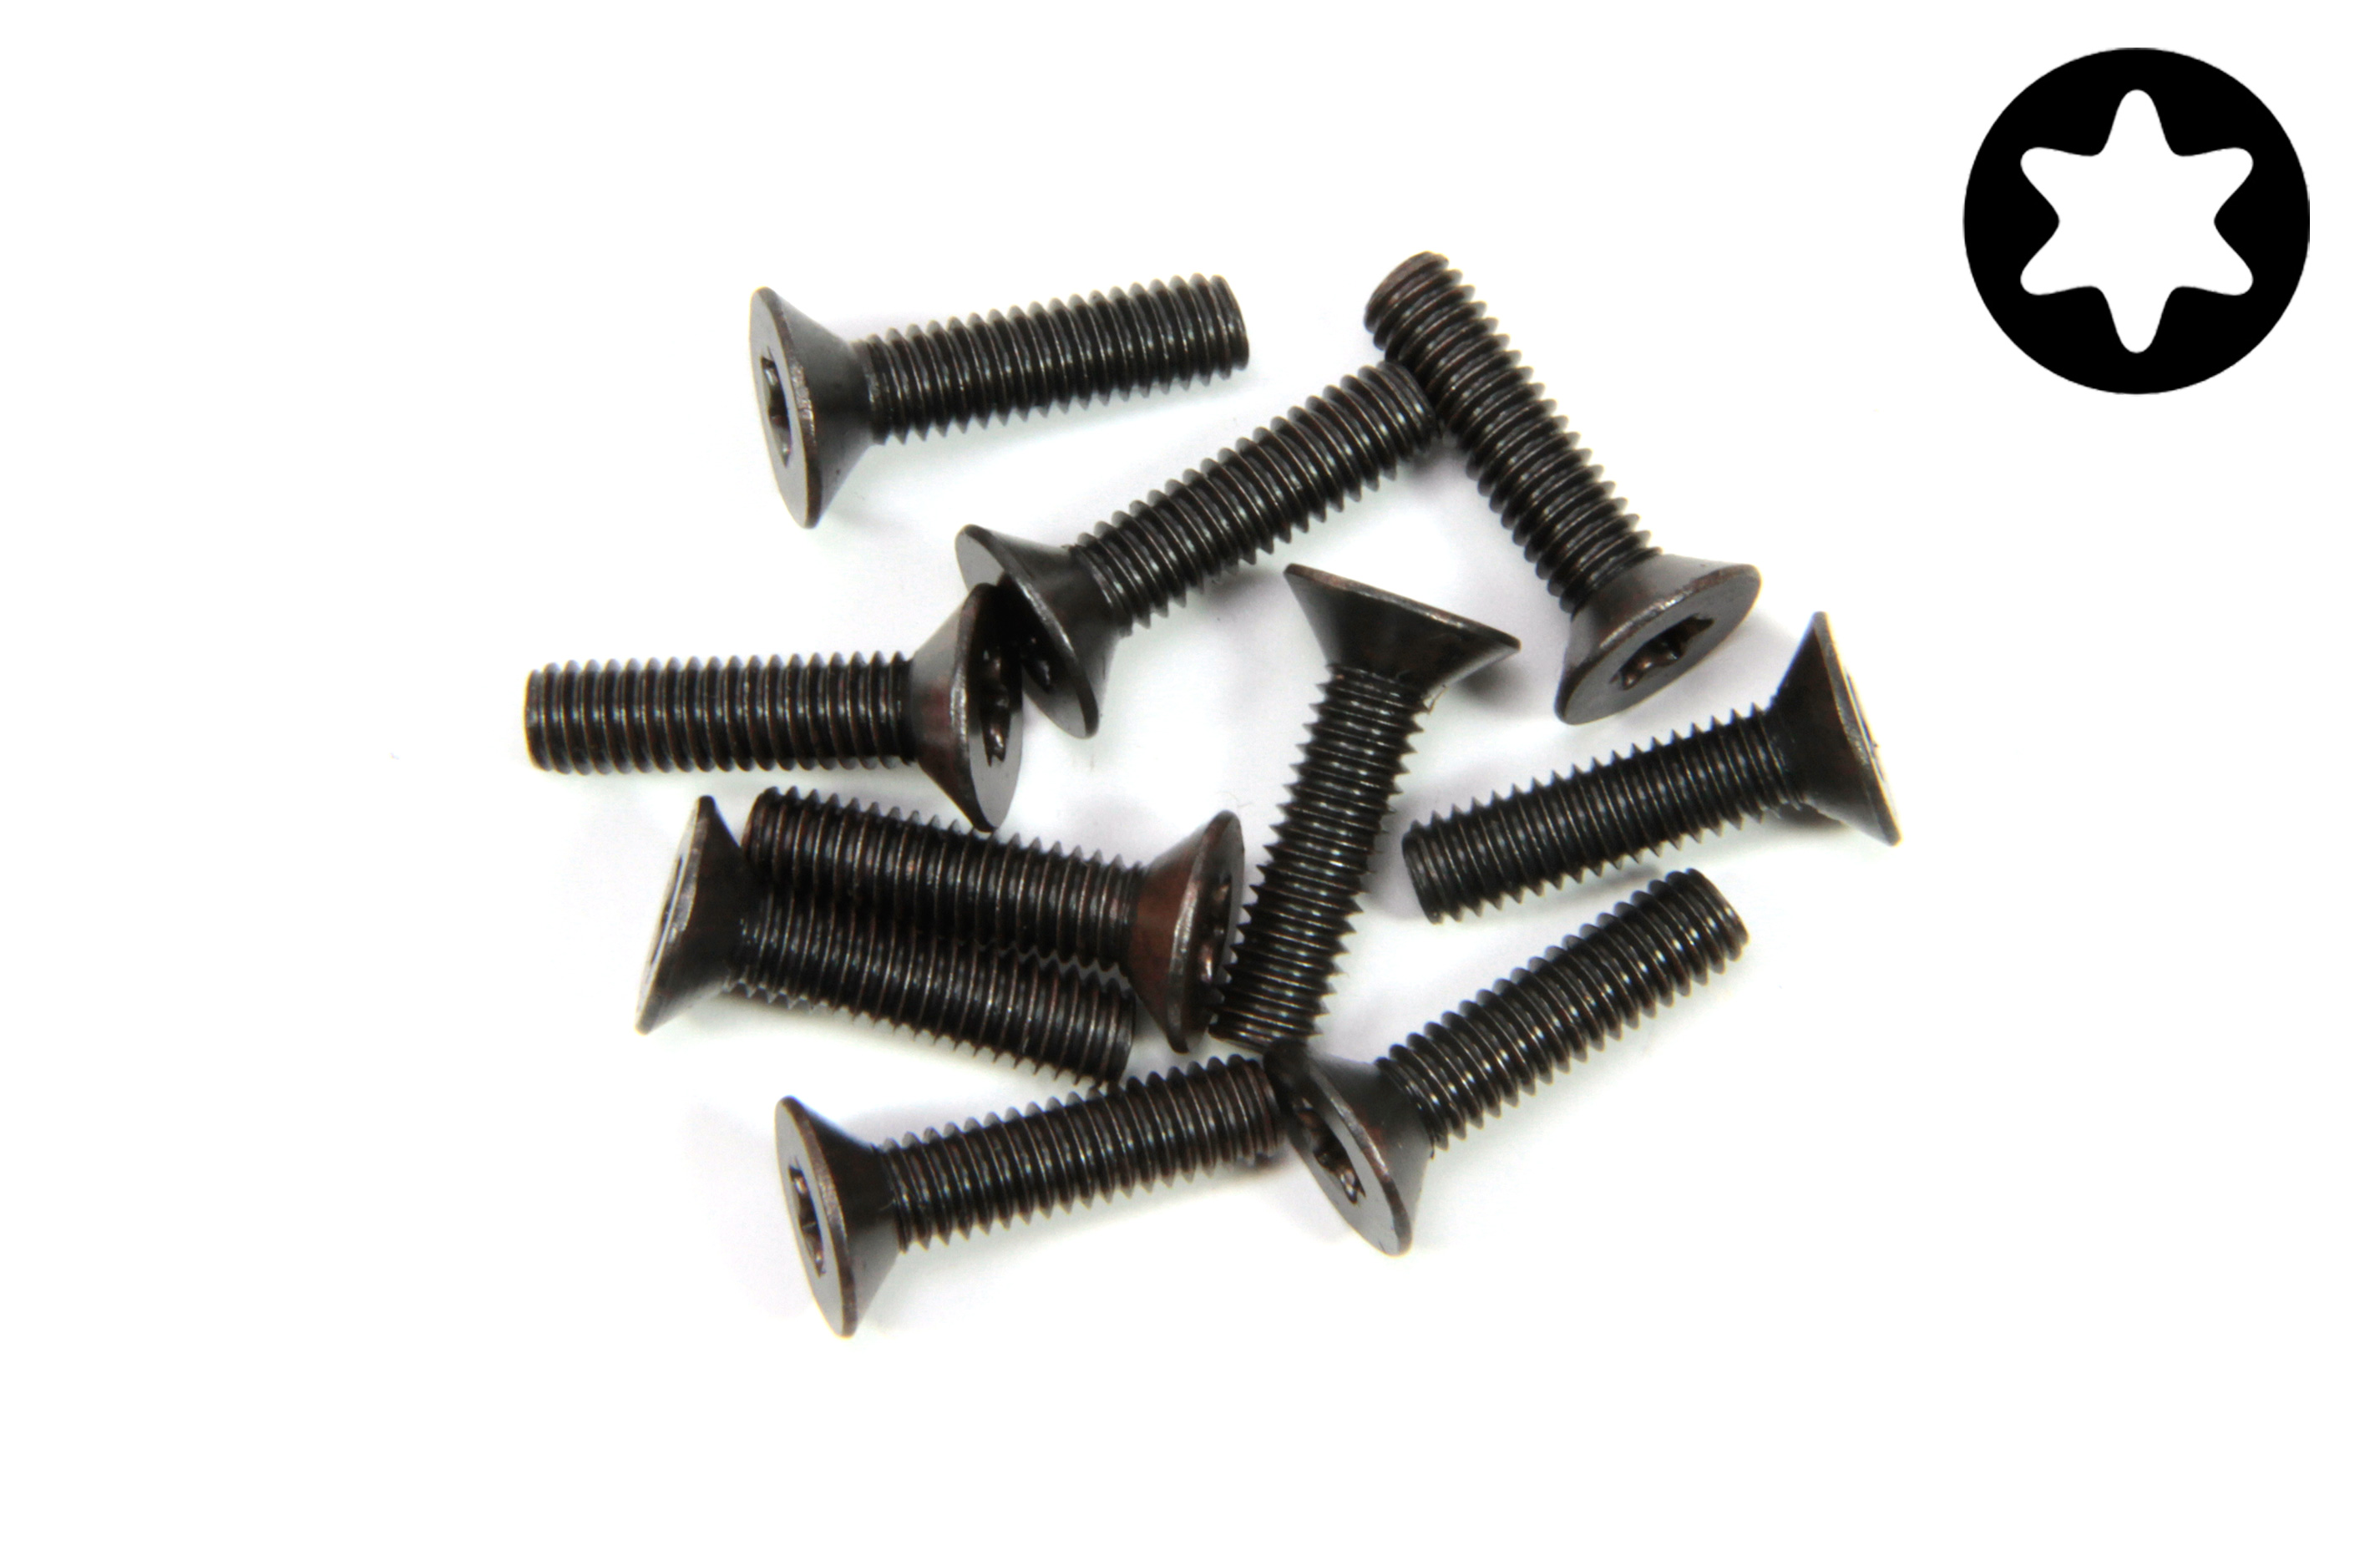 y6920/16-10.9 Countersunk screw with Torx M4 x 16 mm, strength 10.9, 10 pieces